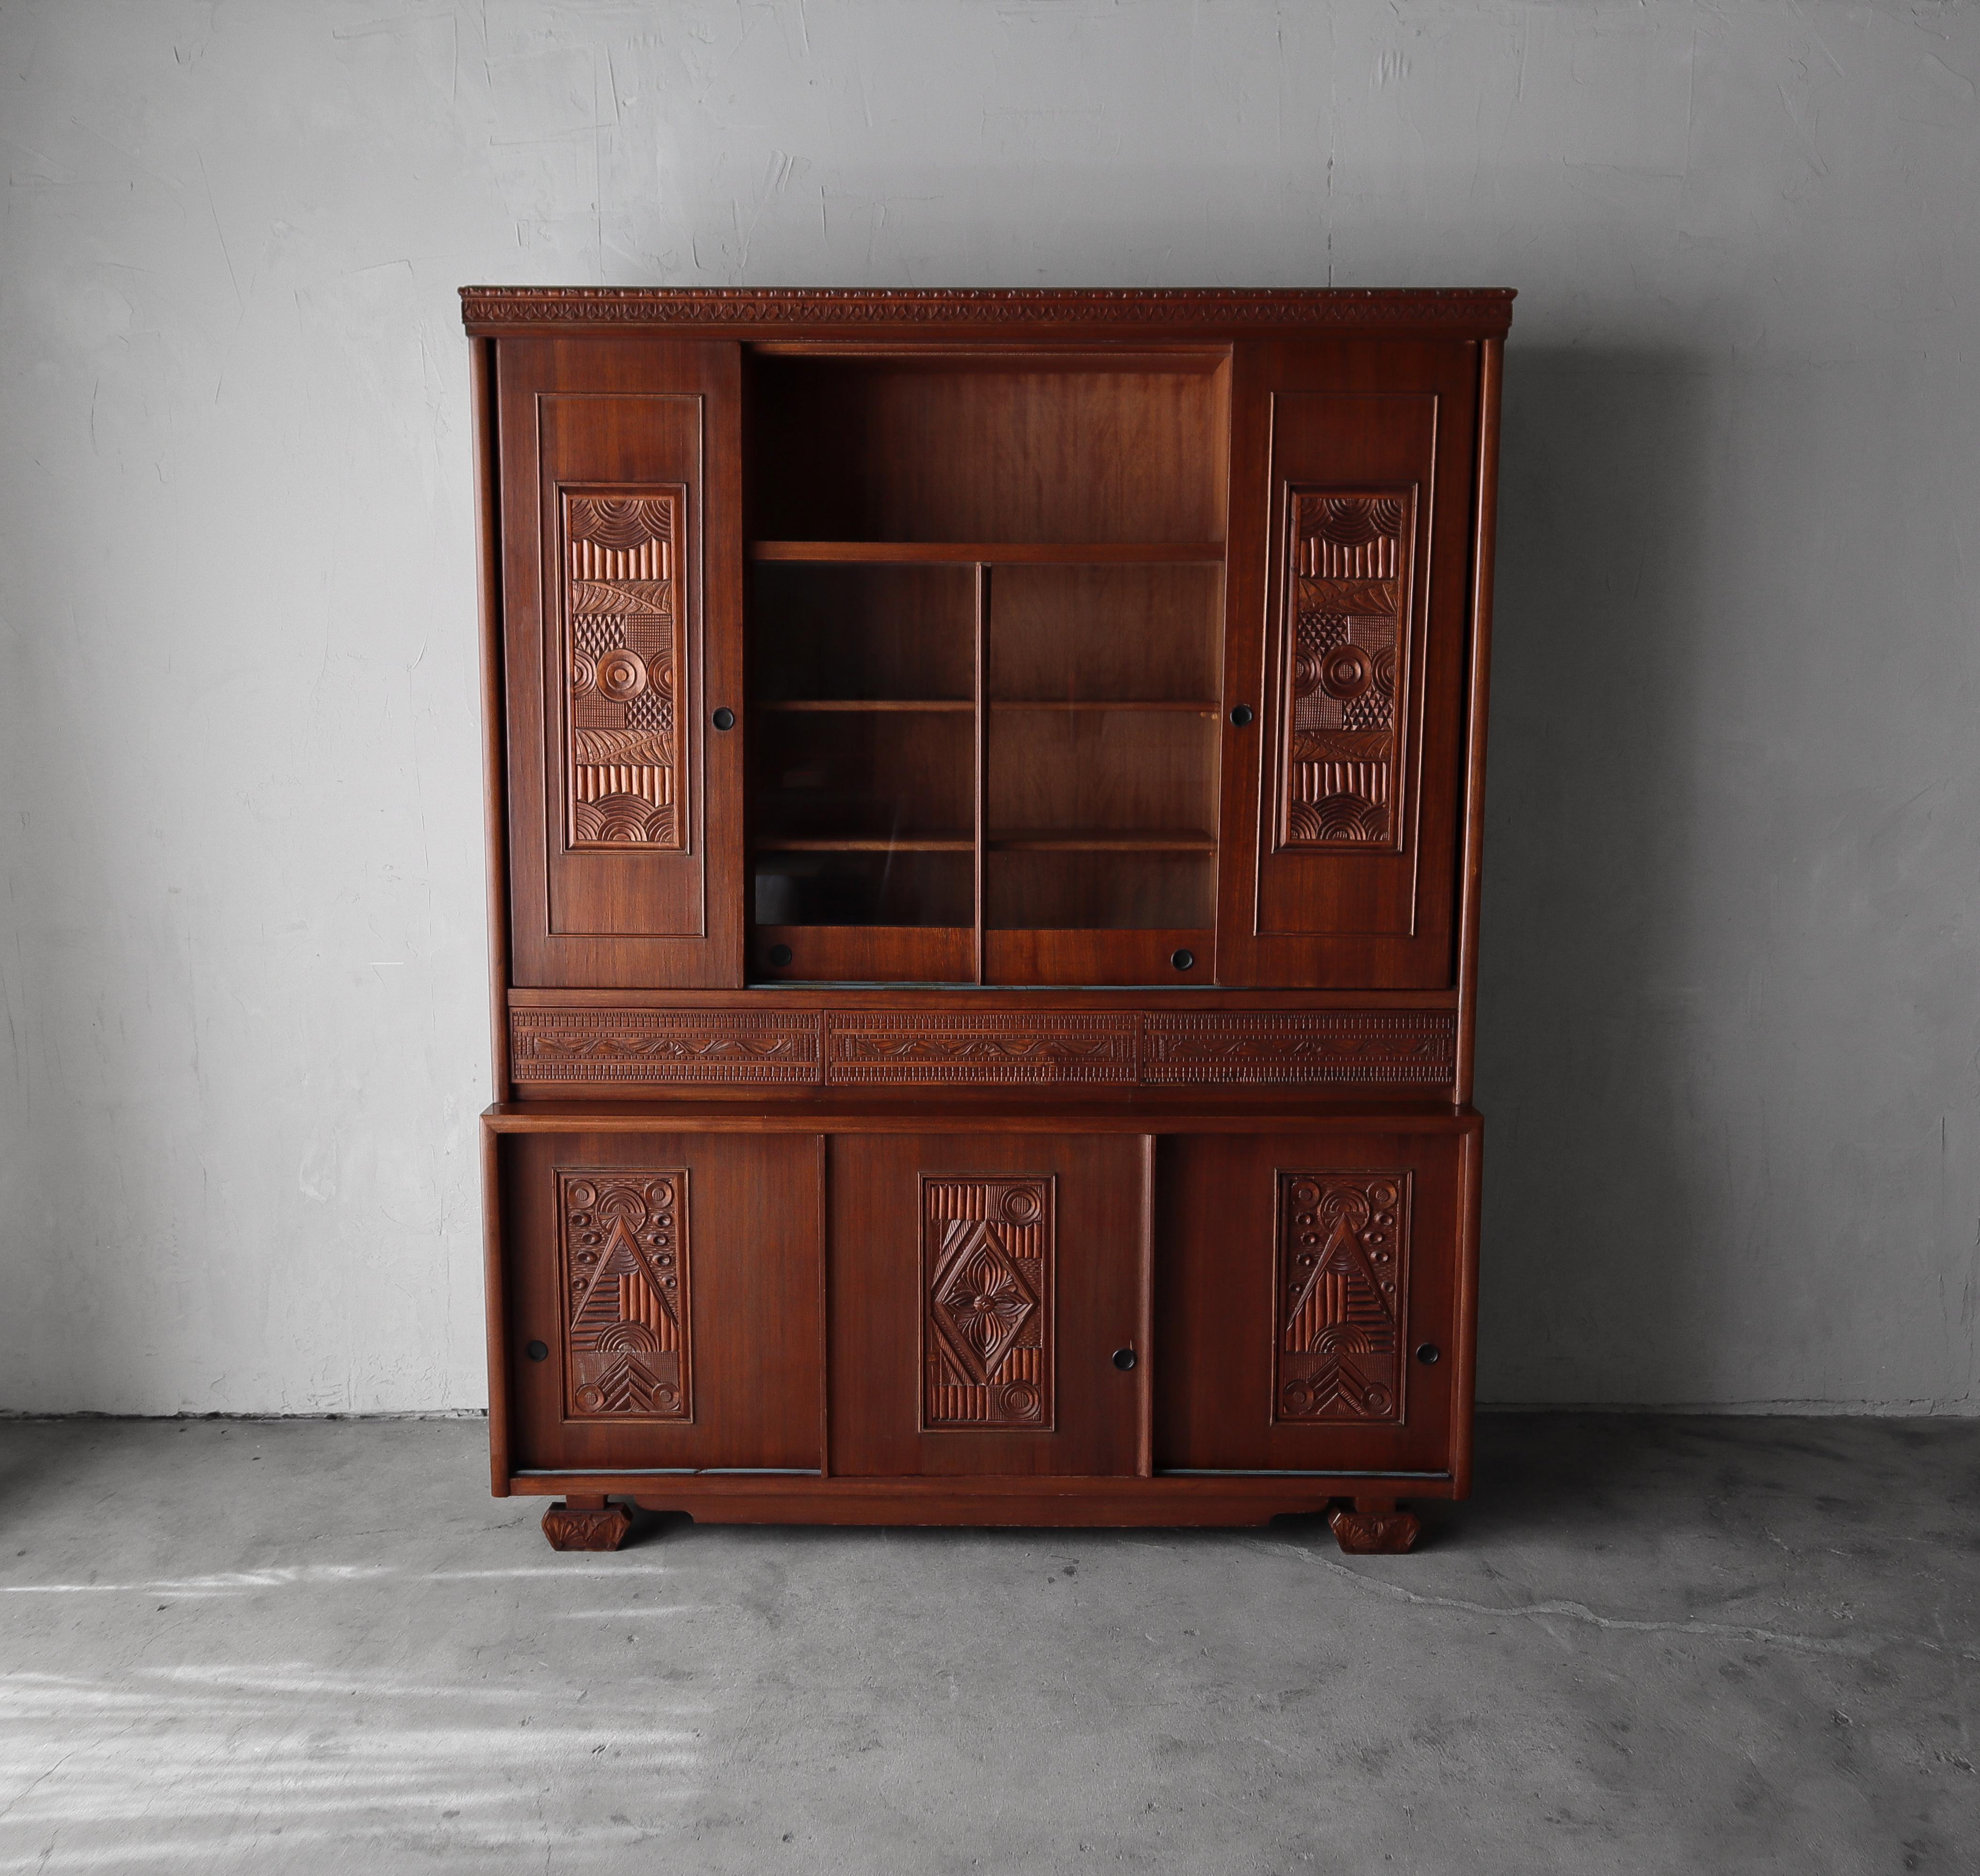 Antique Panelcarve Wood Hutch Cabinet In Good Condition For Sale In Las Vegas, NV